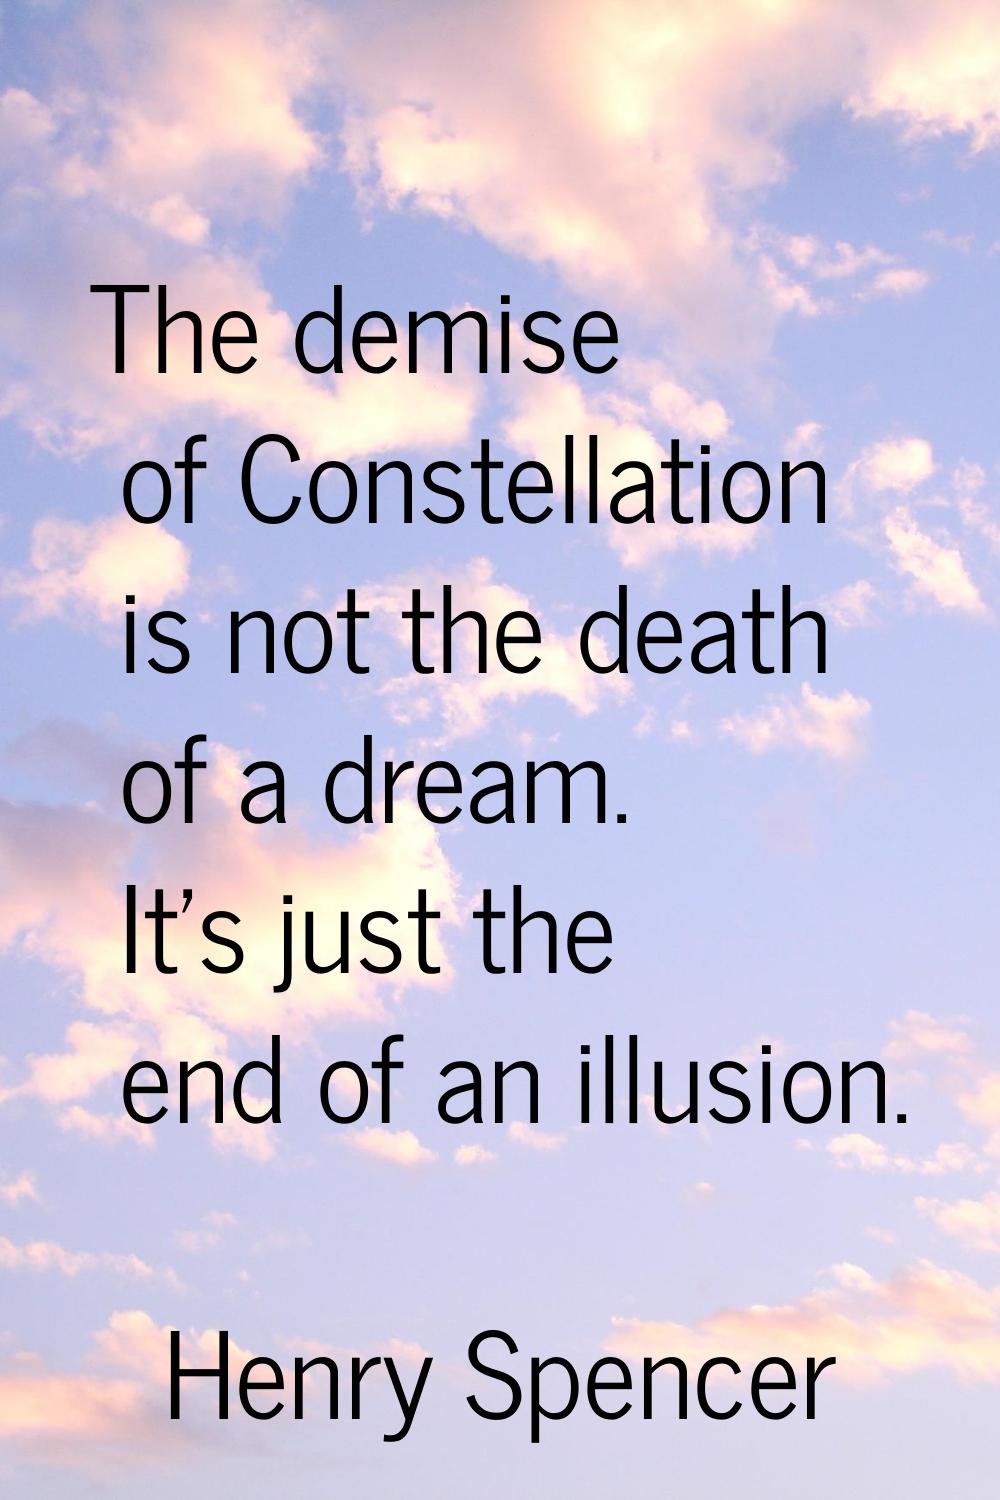 The demise of Constellation is not the death of a dream. It's just the end of an illusion.